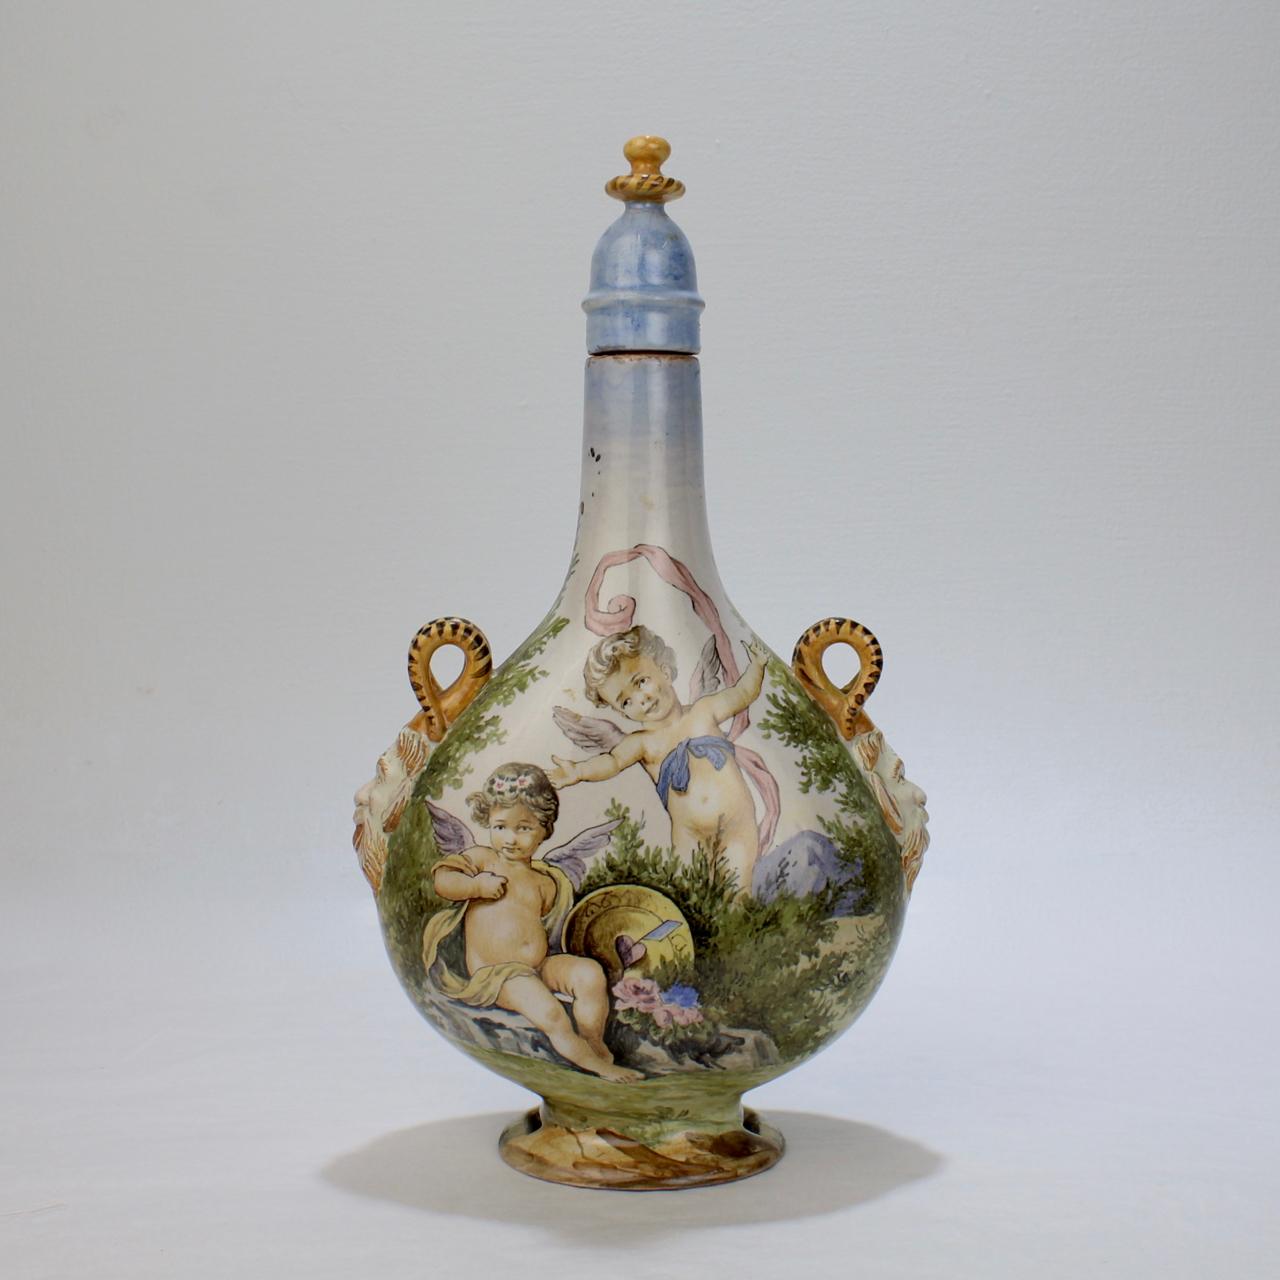 A very fine antique Maiolica pilgrim flask & stopper by Ginori.

Decorated in the Urbino istoriato style with polychrome cherubs to the front and a landscape scene to the reverse.

Having satyr form hands and a conforming cover. 

A fine form